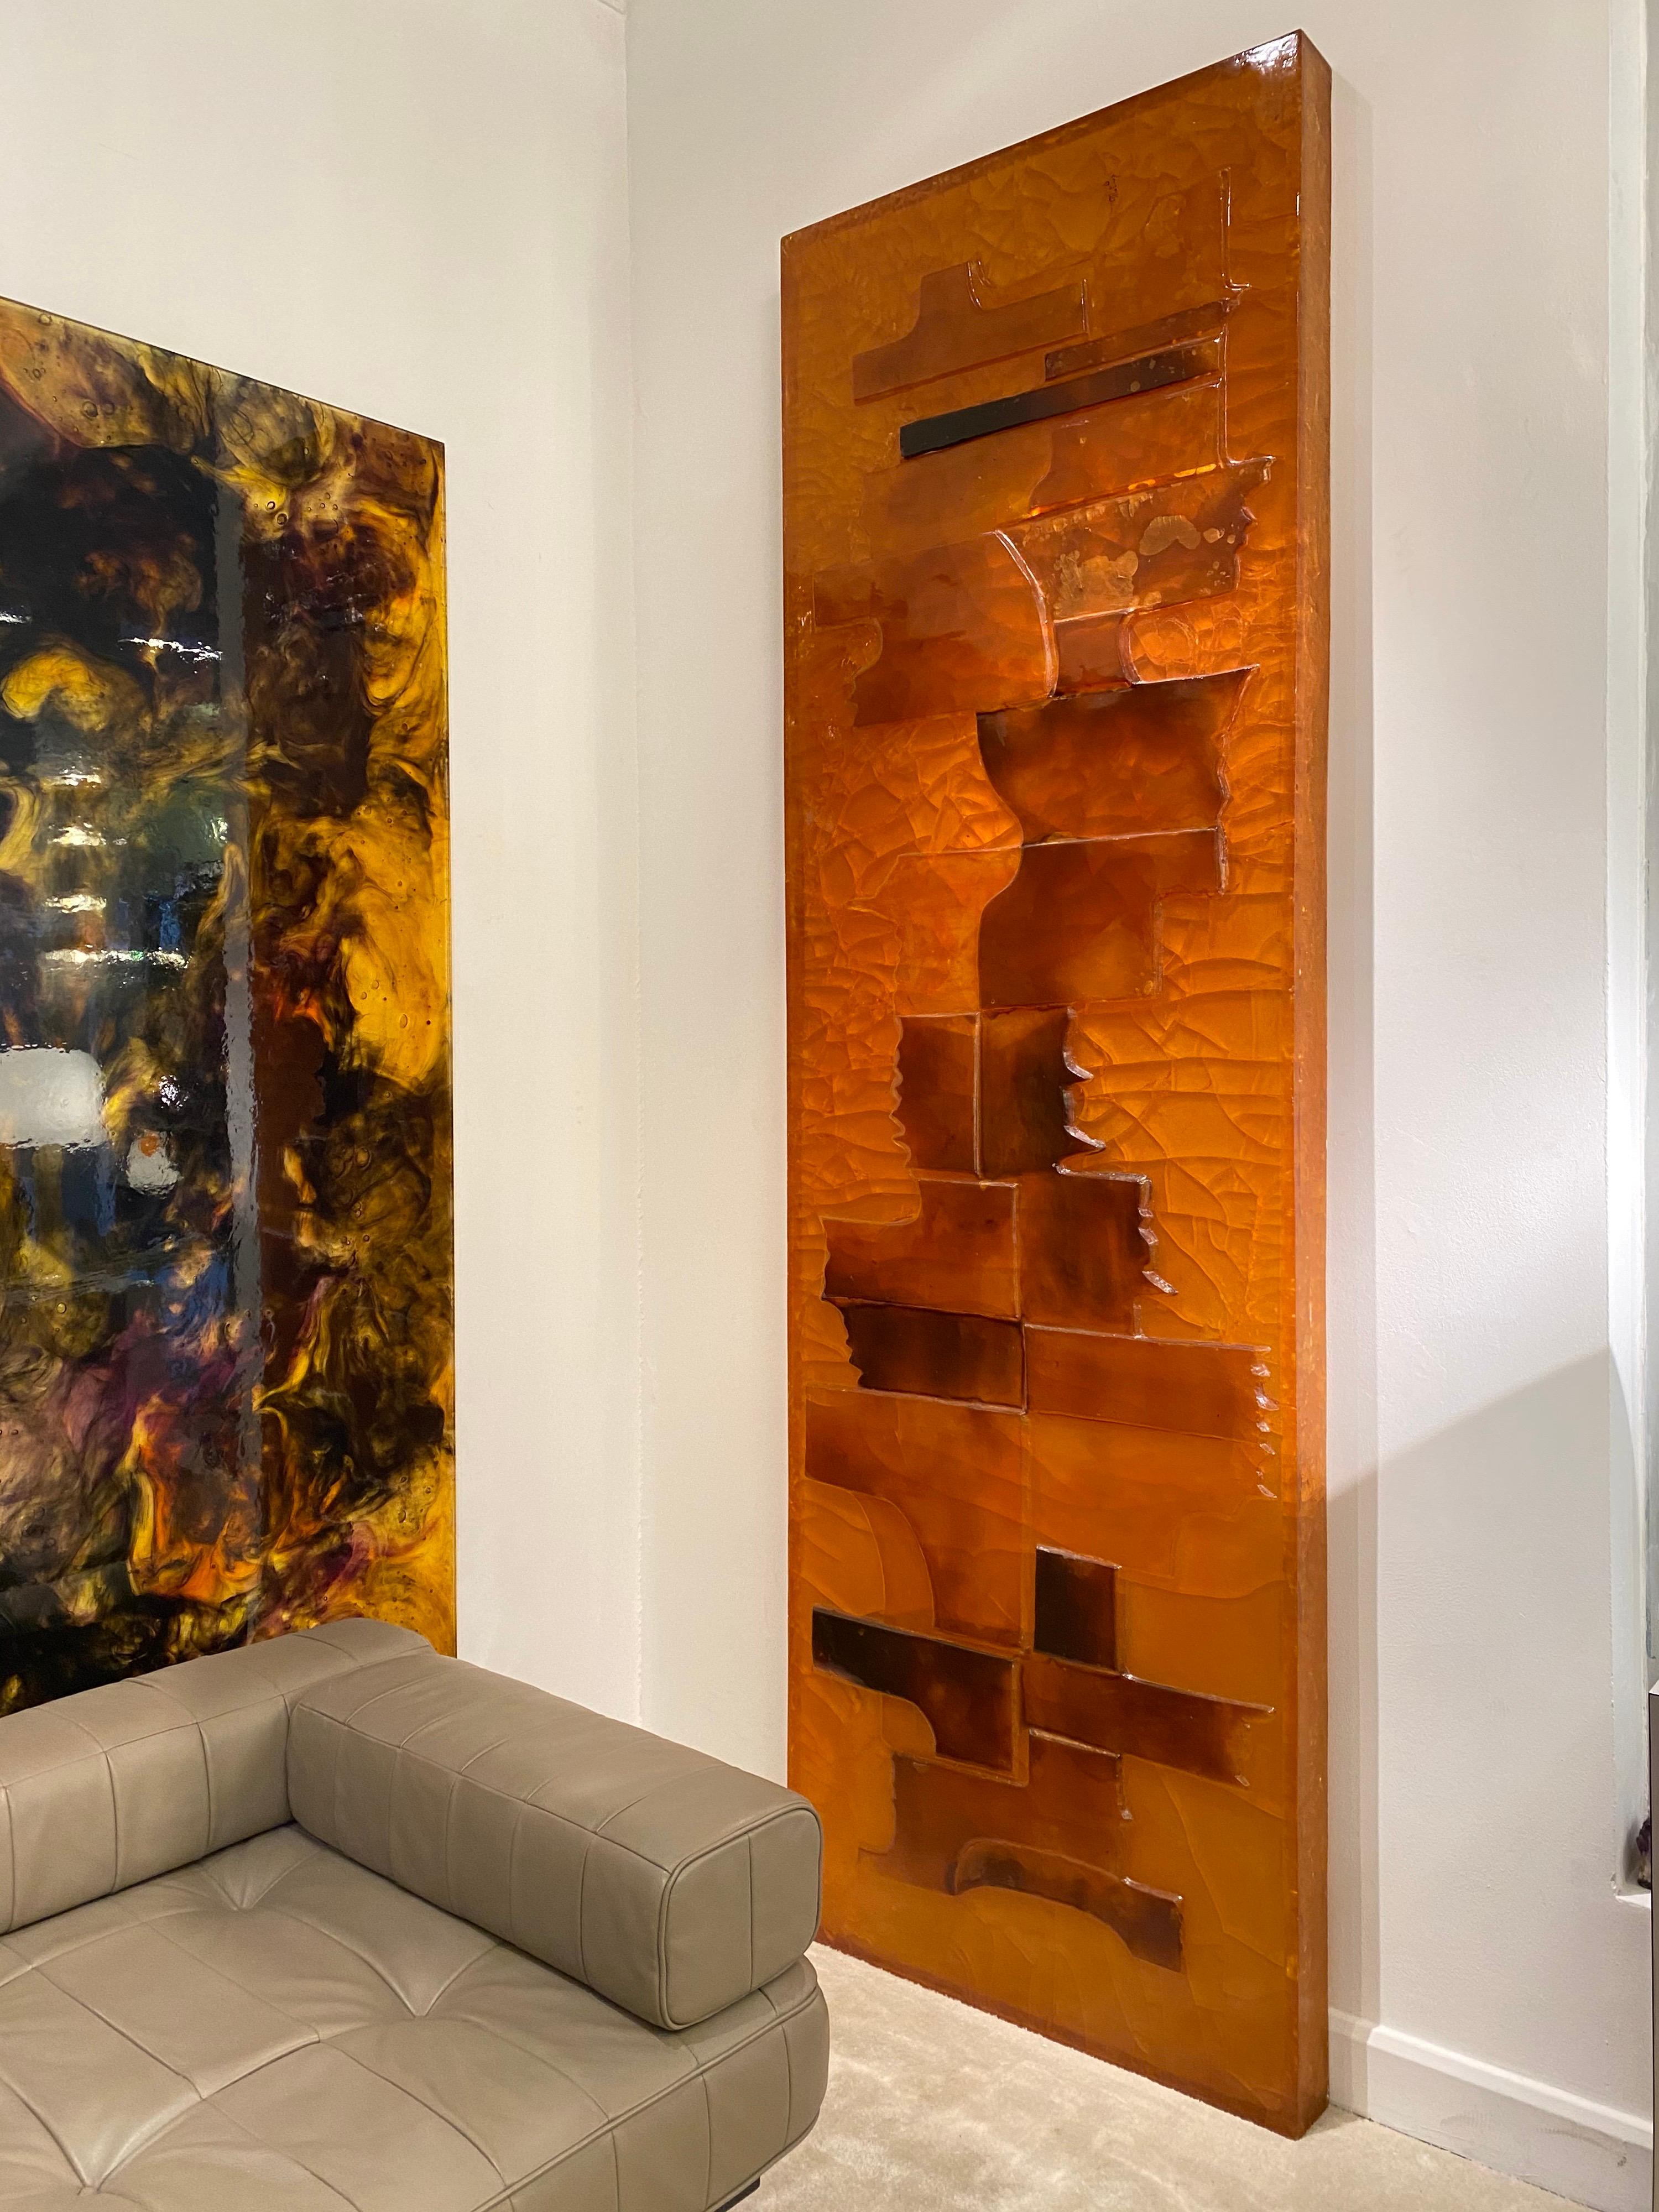 Unique large fractal resin wallpanel with orange and black abstract forms
Great vintage condition.